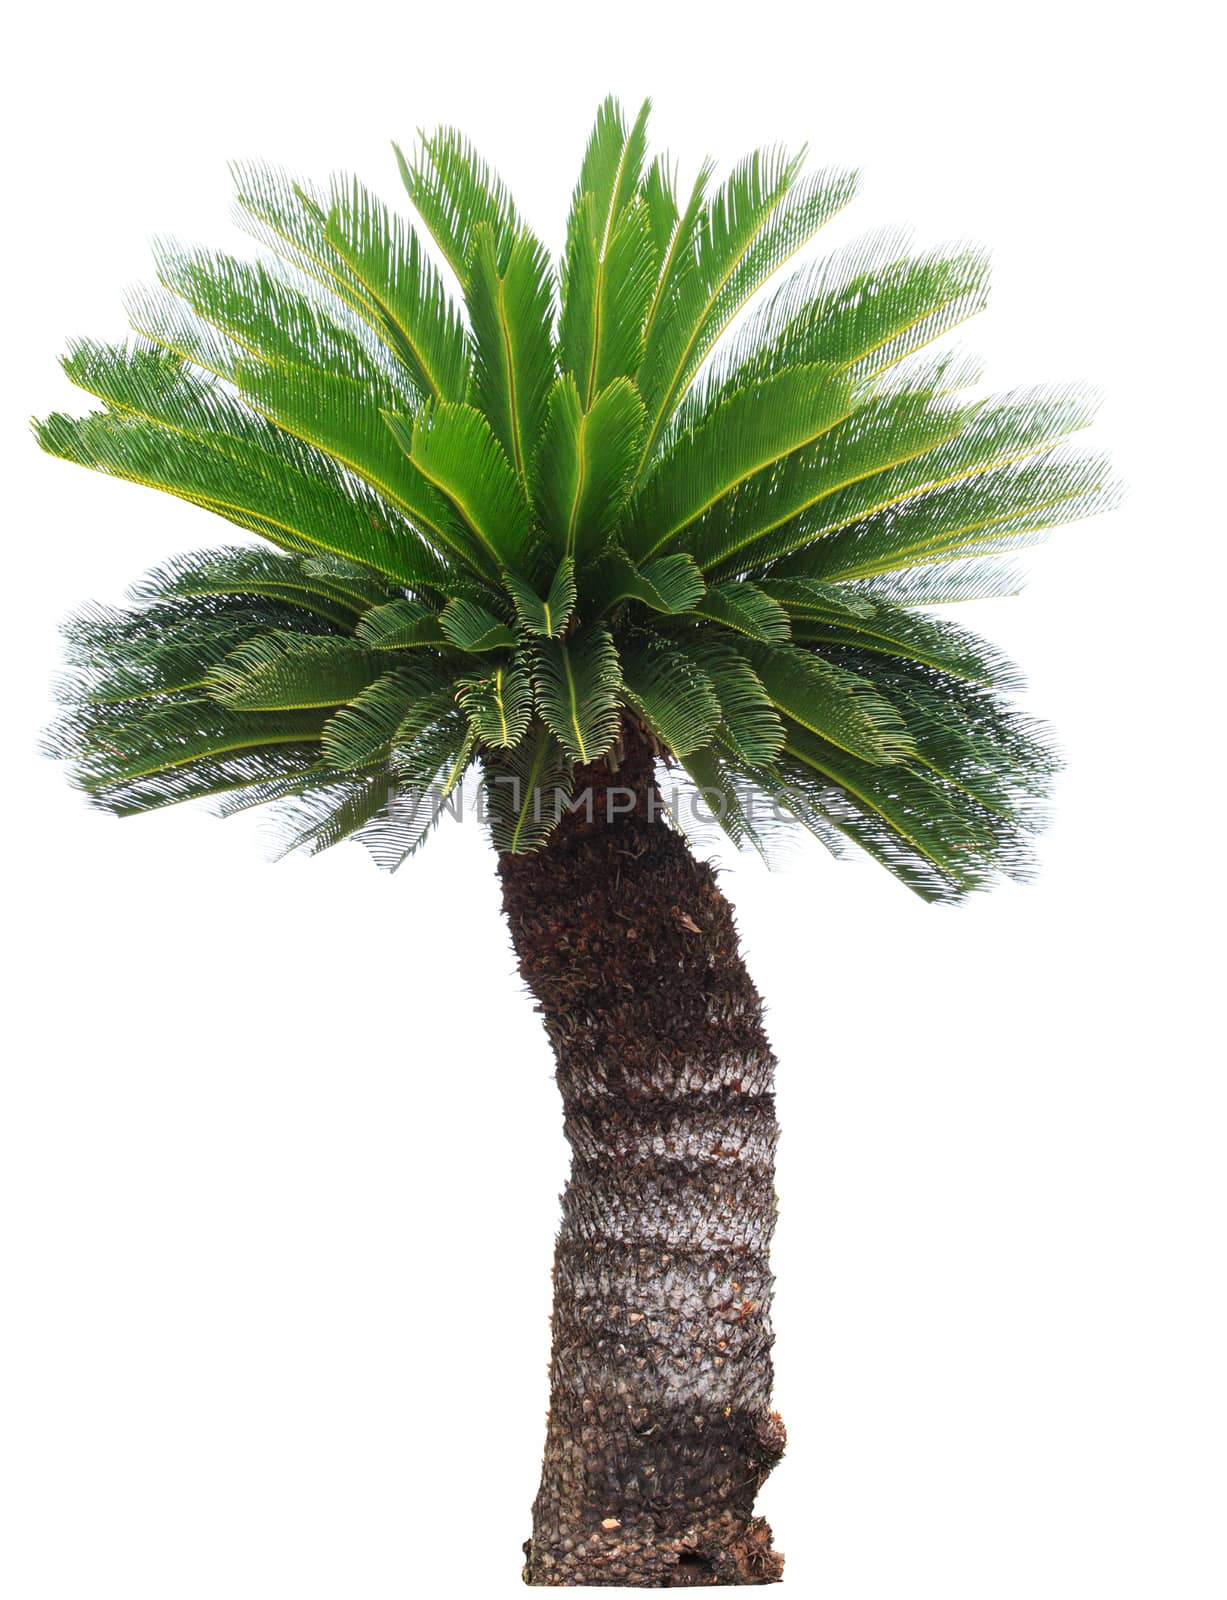 close up Cycad palm tree isolated on white background usefor gar by khunaspix